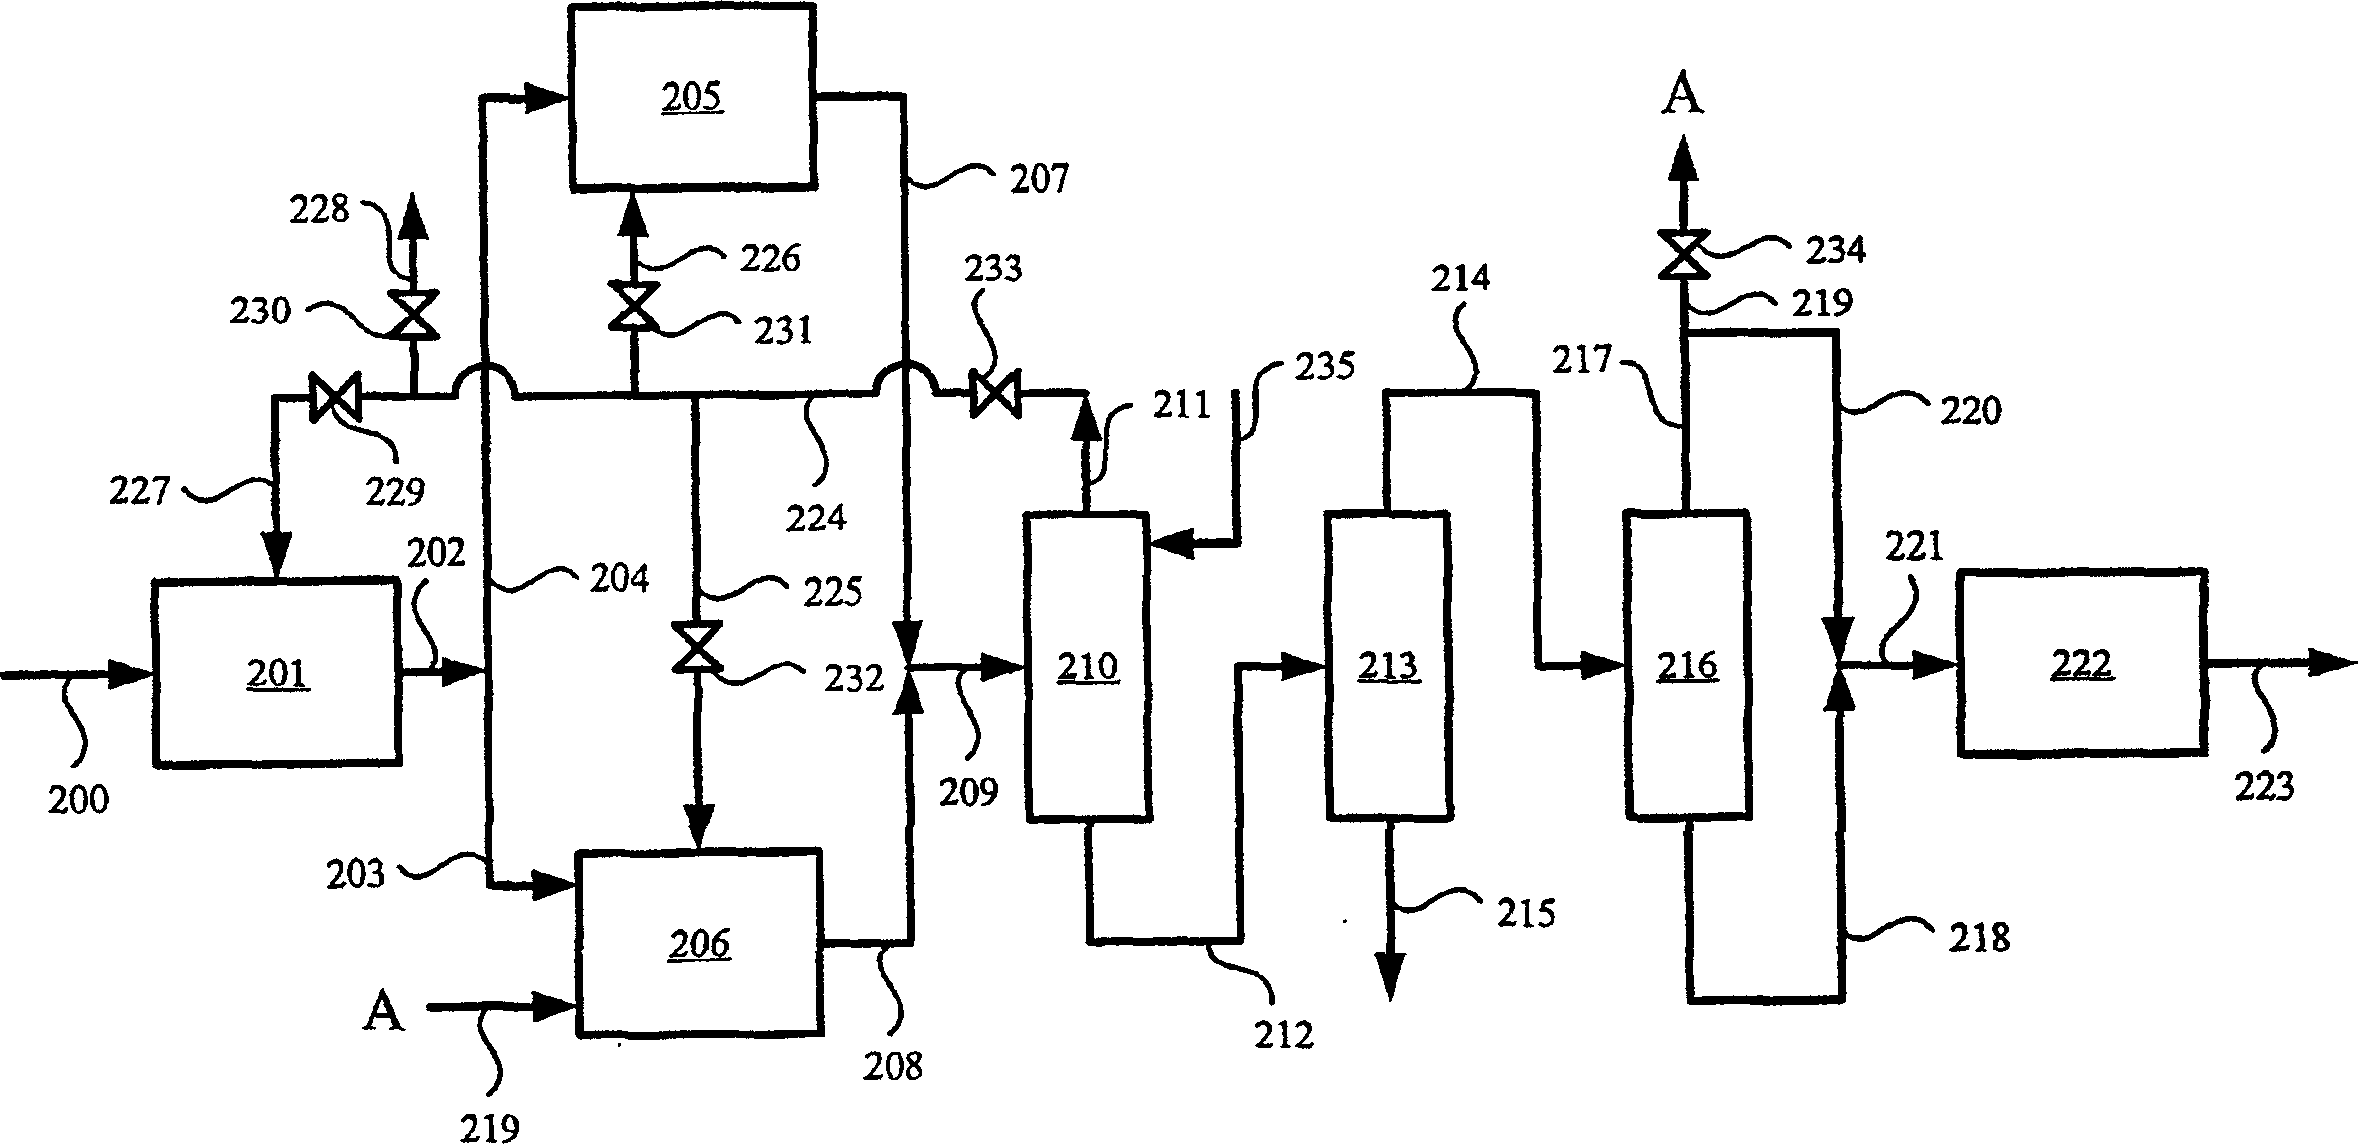 Method for controlling the ratio of ethylene to propylene produced in an oxygenate to olefin conversion process